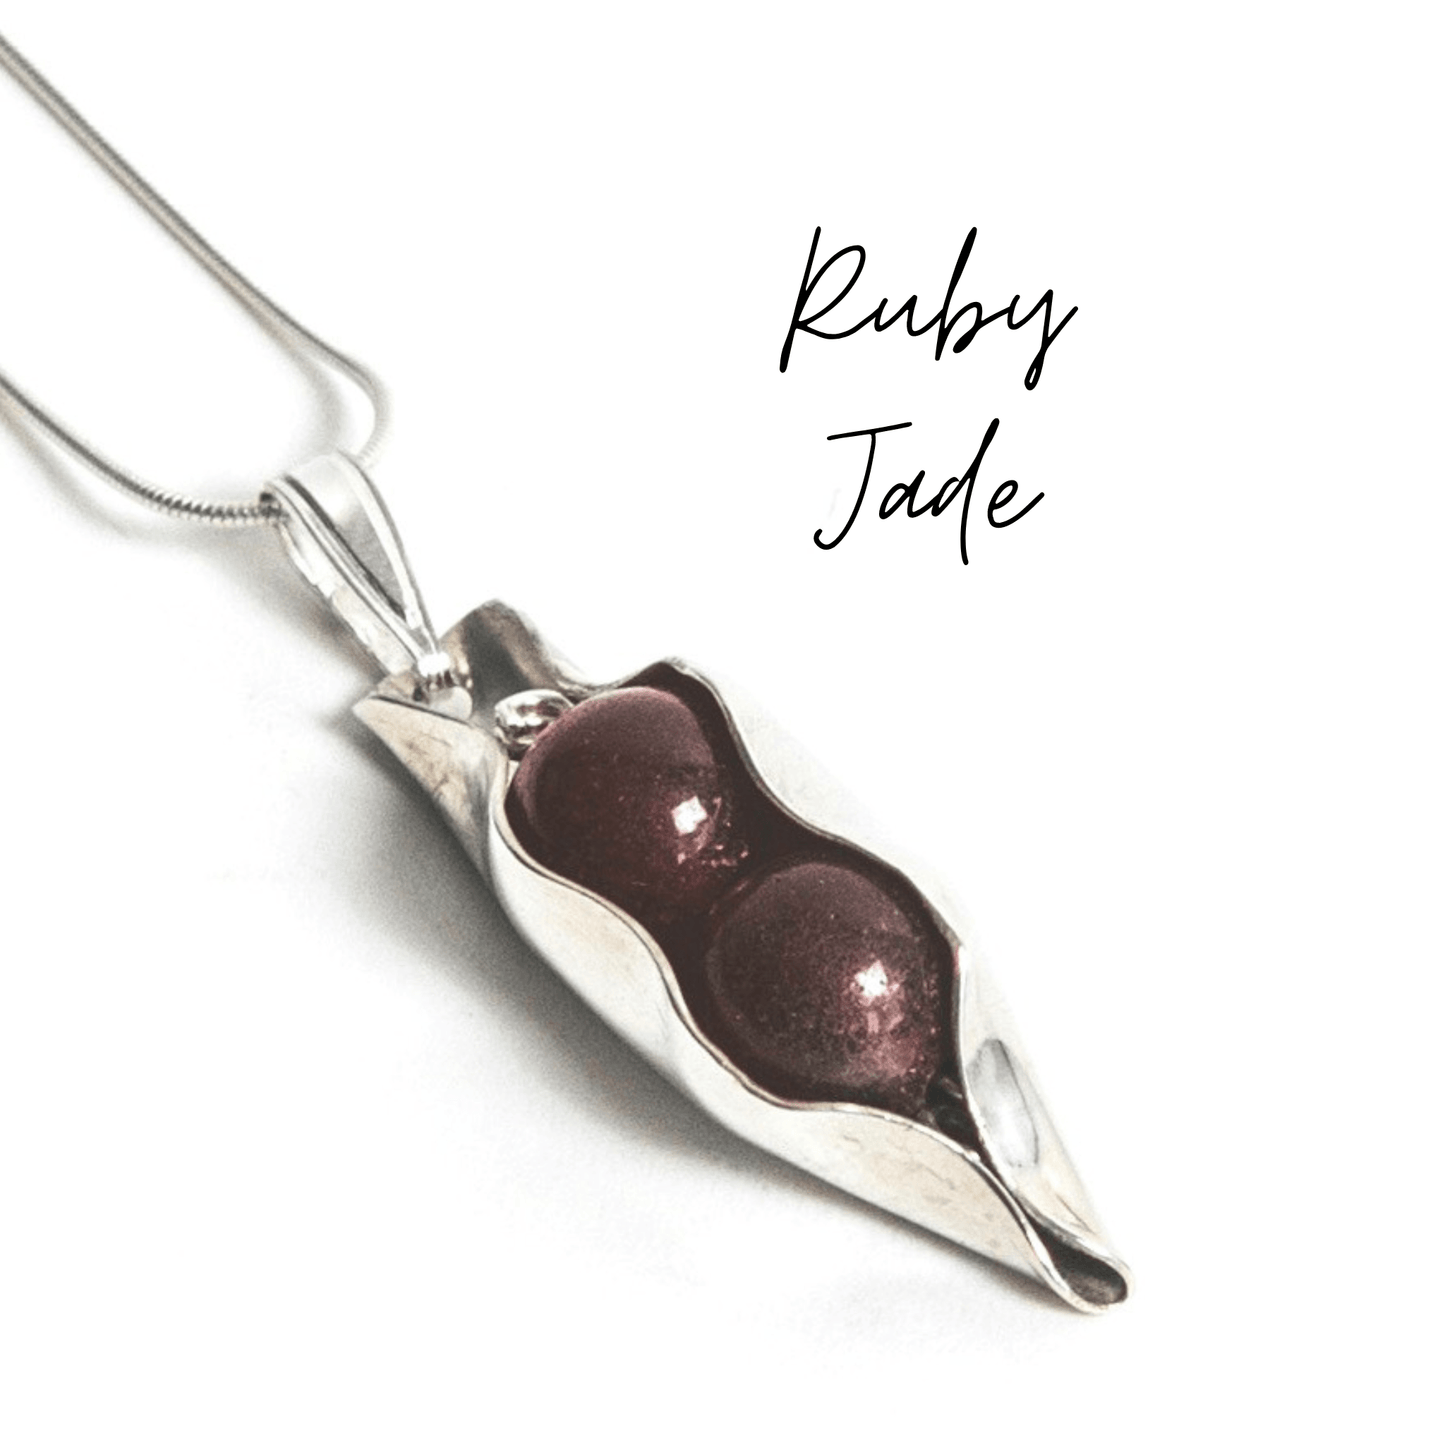 40th Ruby anniversary necklace | Two peas In a pod | Ruby jewellery for women | Ruby Jade necklace | 40th Anniversary wife | Engraved Initials - RACHEL SHRIEVES DESIGN